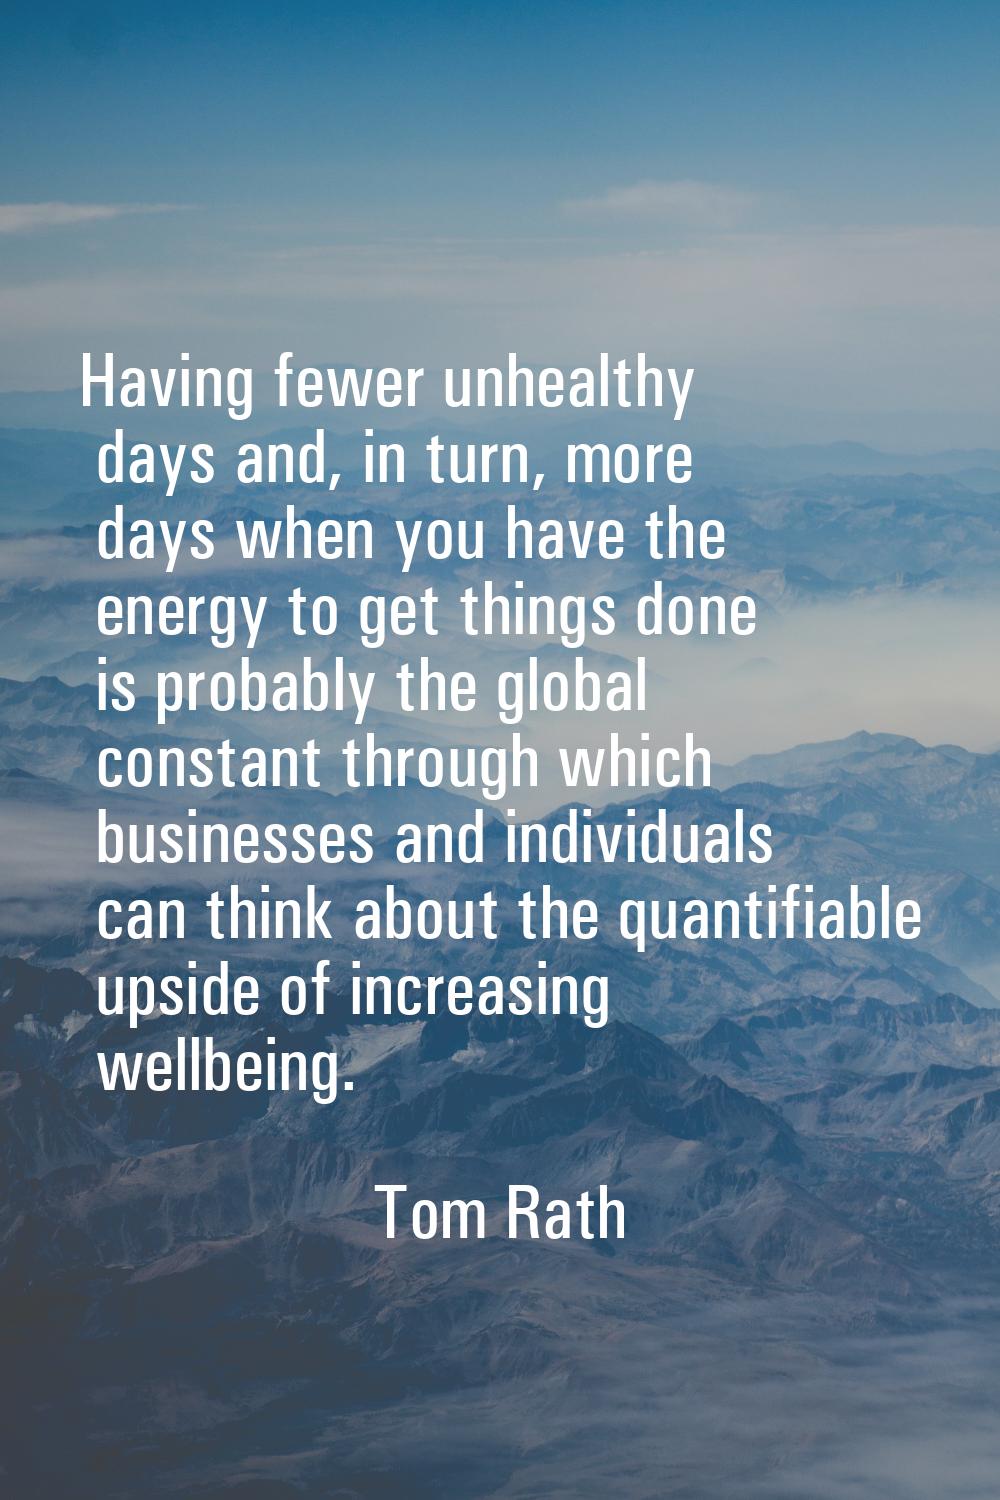 Having fewer unhealthy days and, in turn, more days when you have the energy to get things done is 